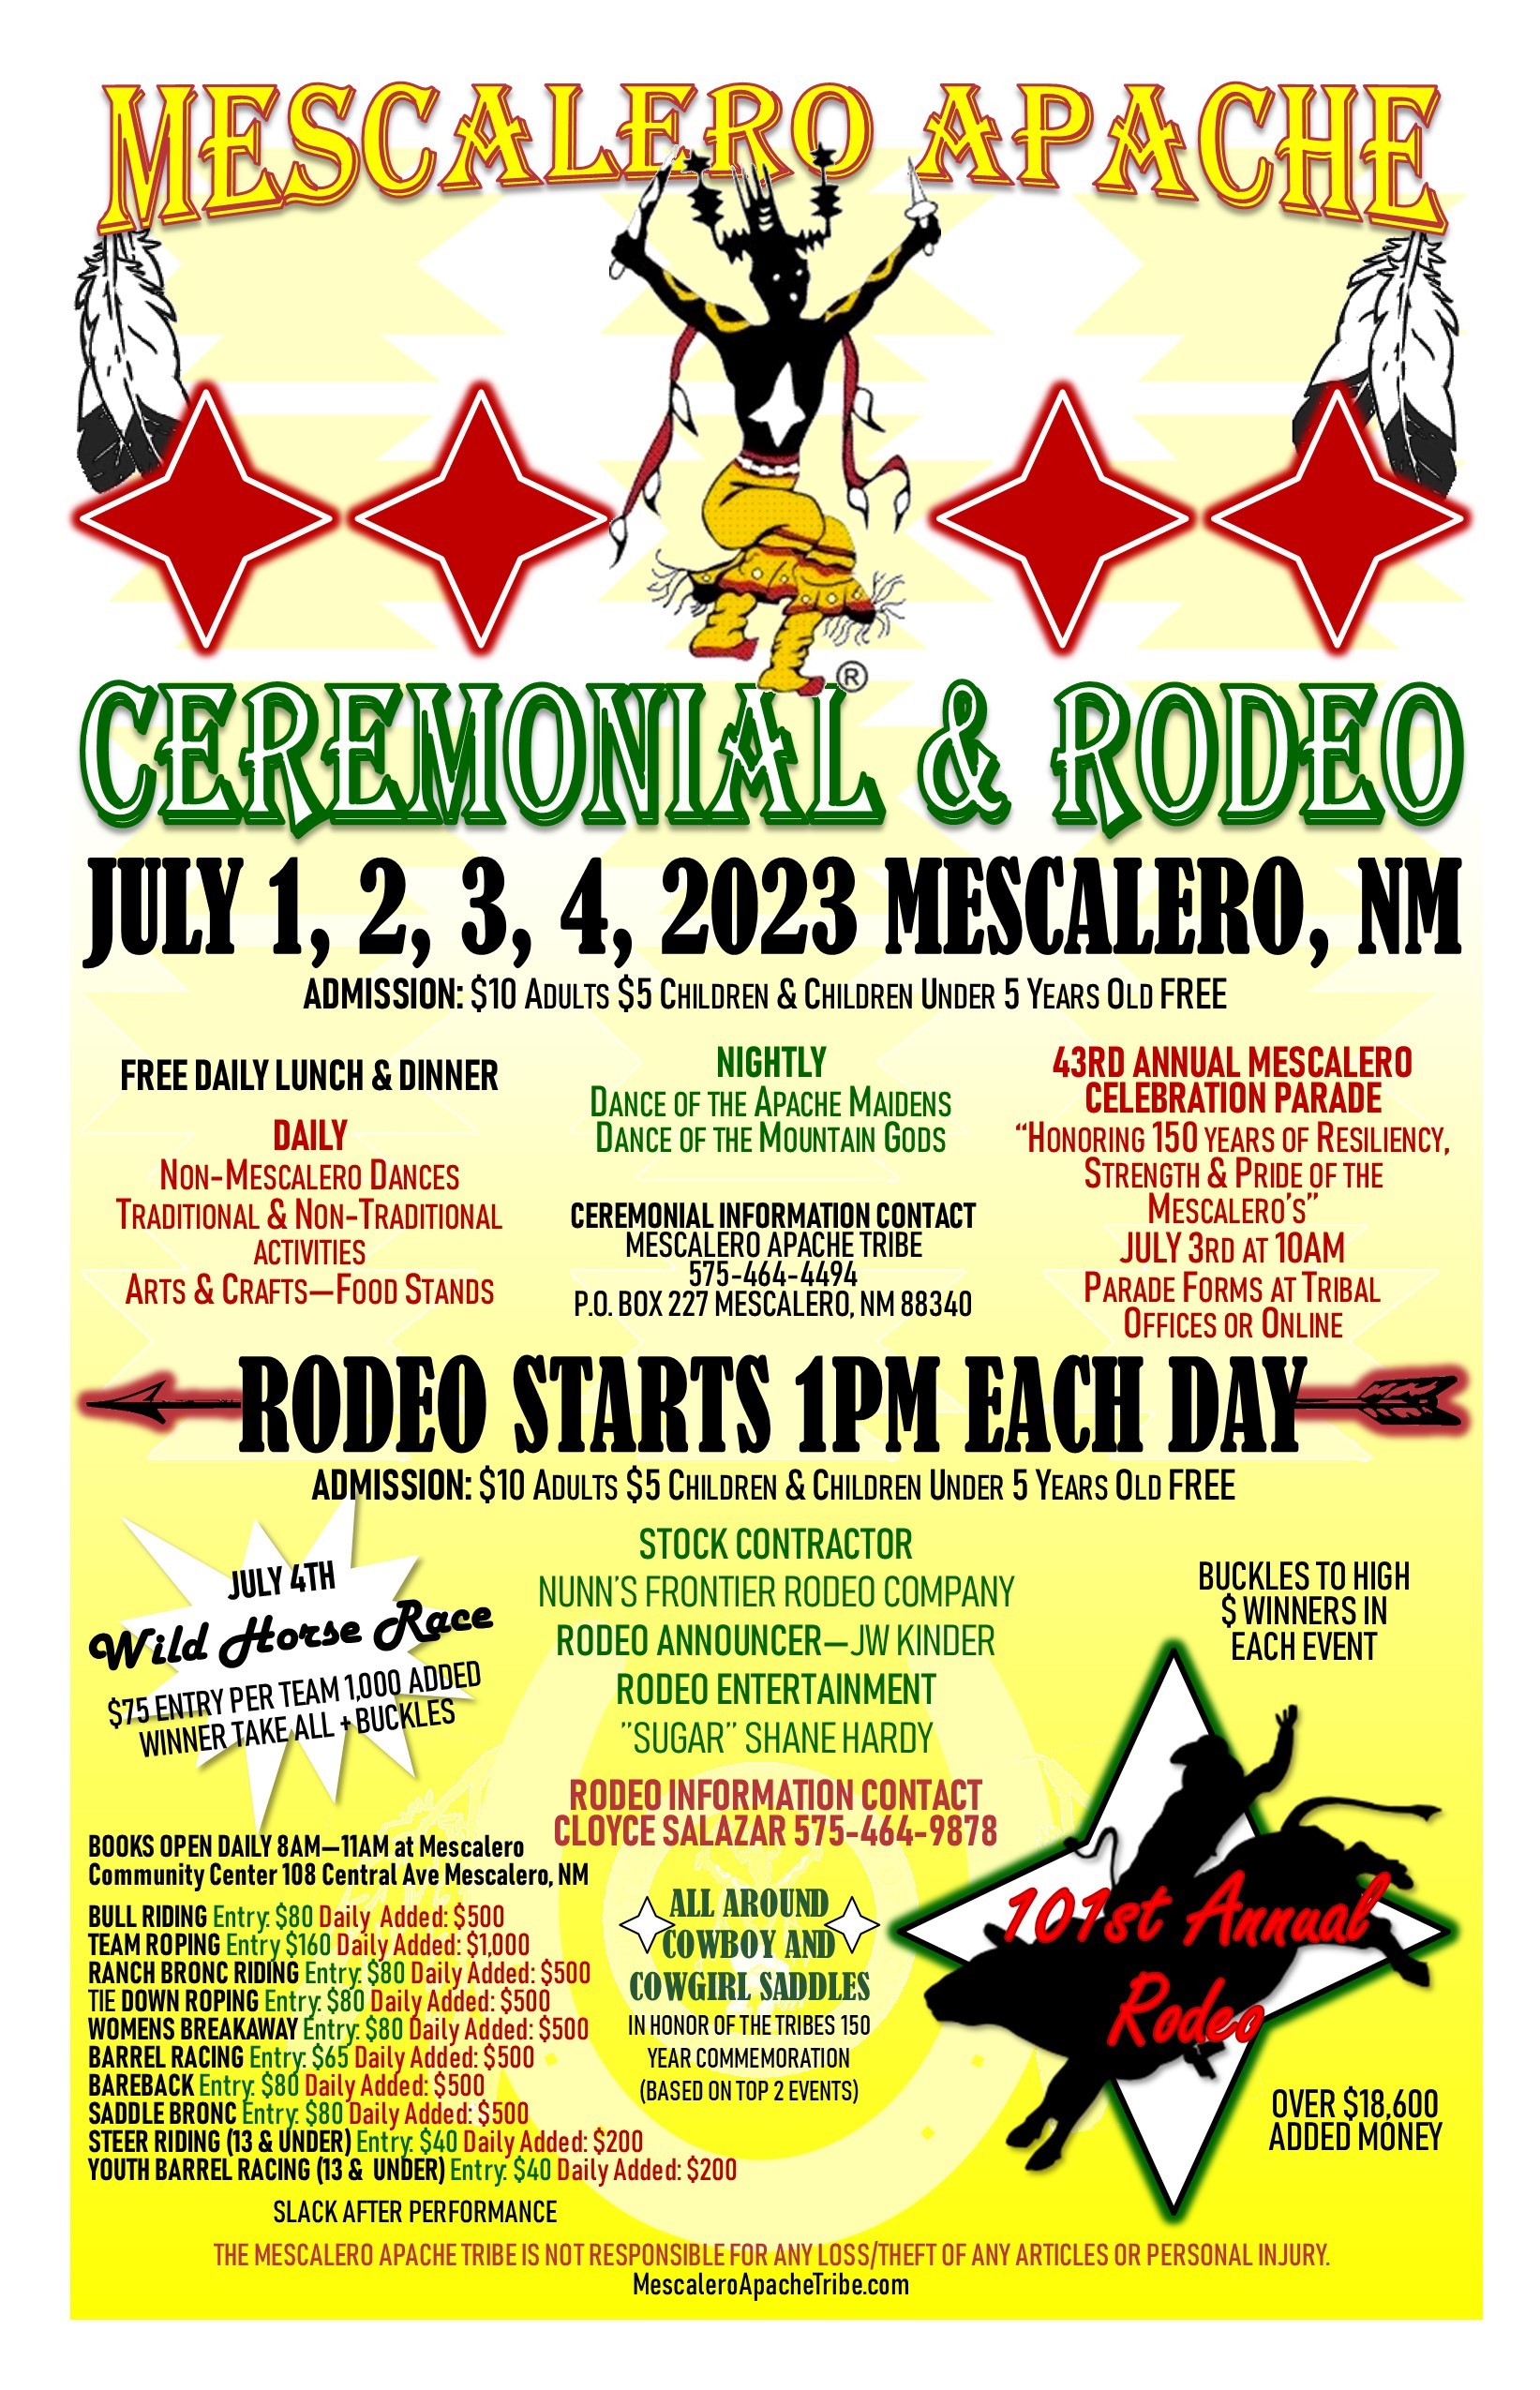 2023 Mescalero Apache Tribe Ceremonial & Rodeo Official Website of